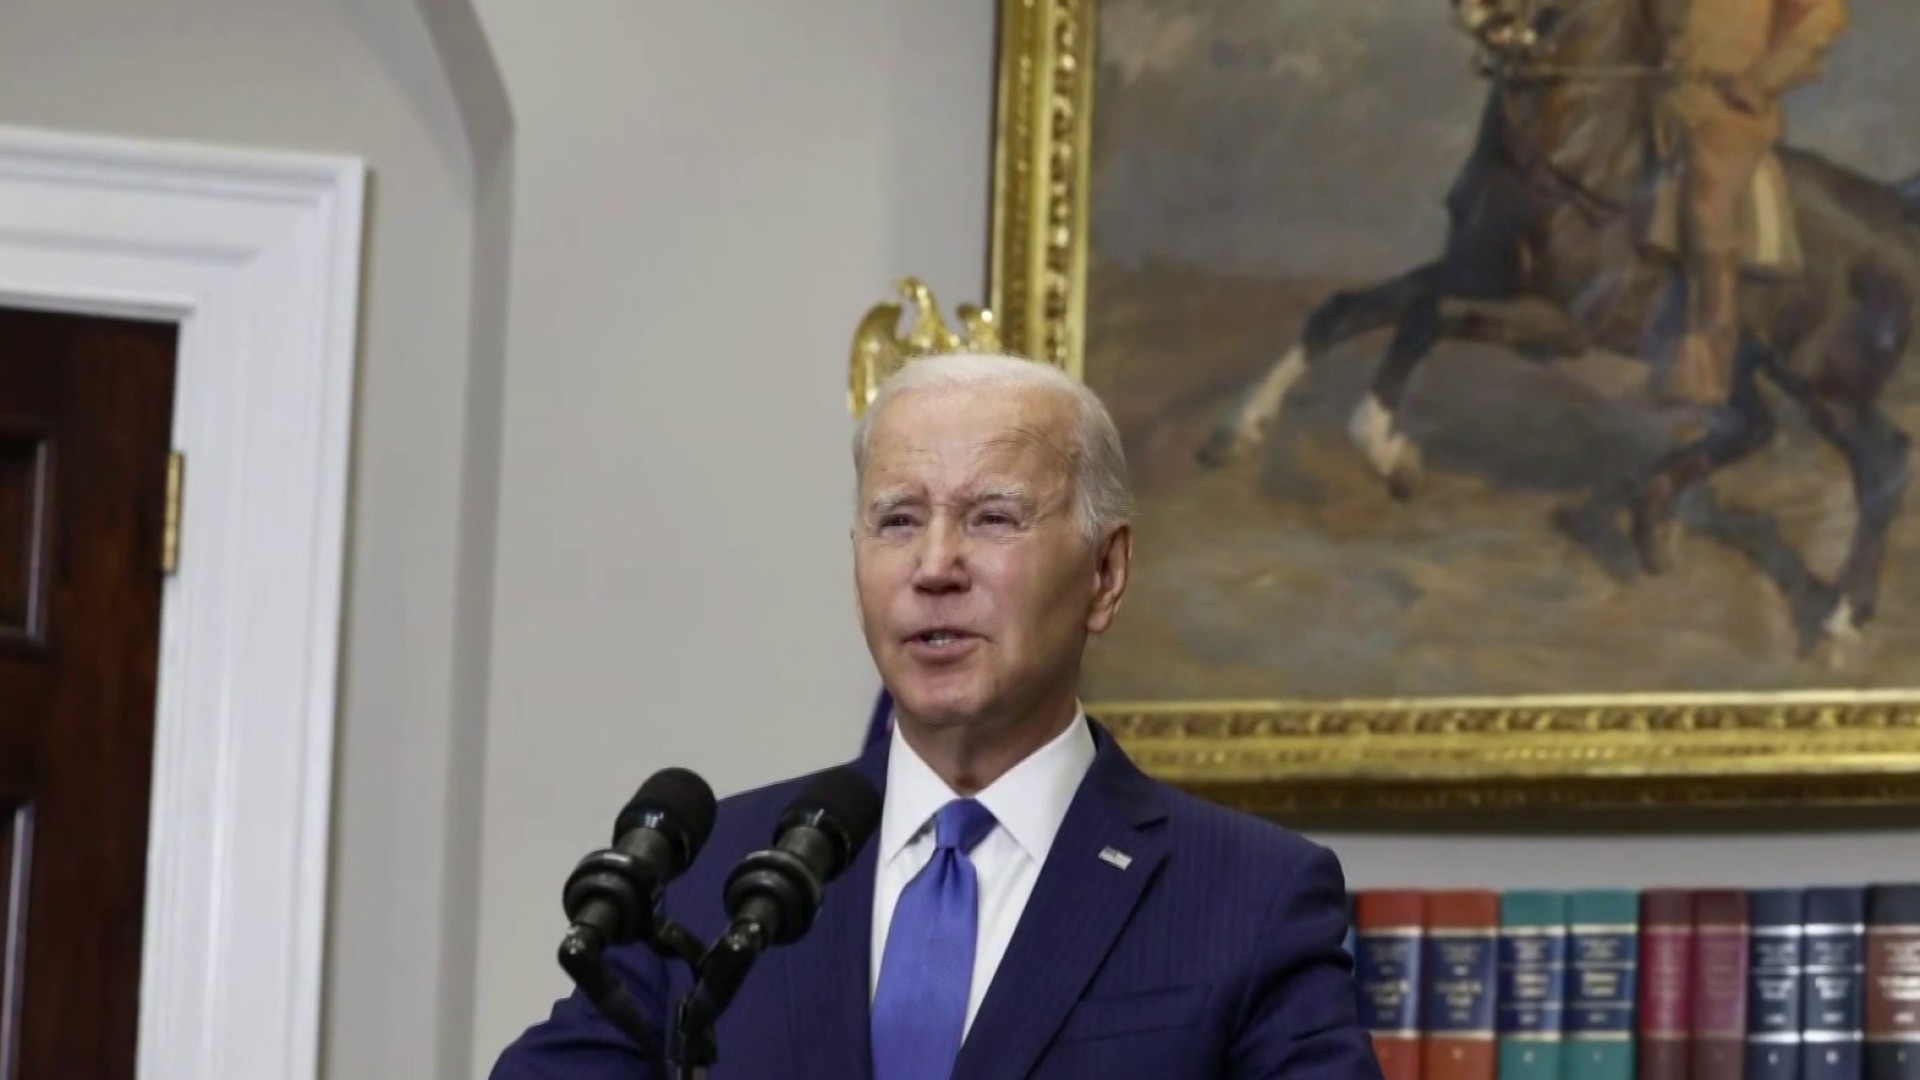 Lawmakers react the impeachment inquiry into Biden ahead of McCarthy meeting